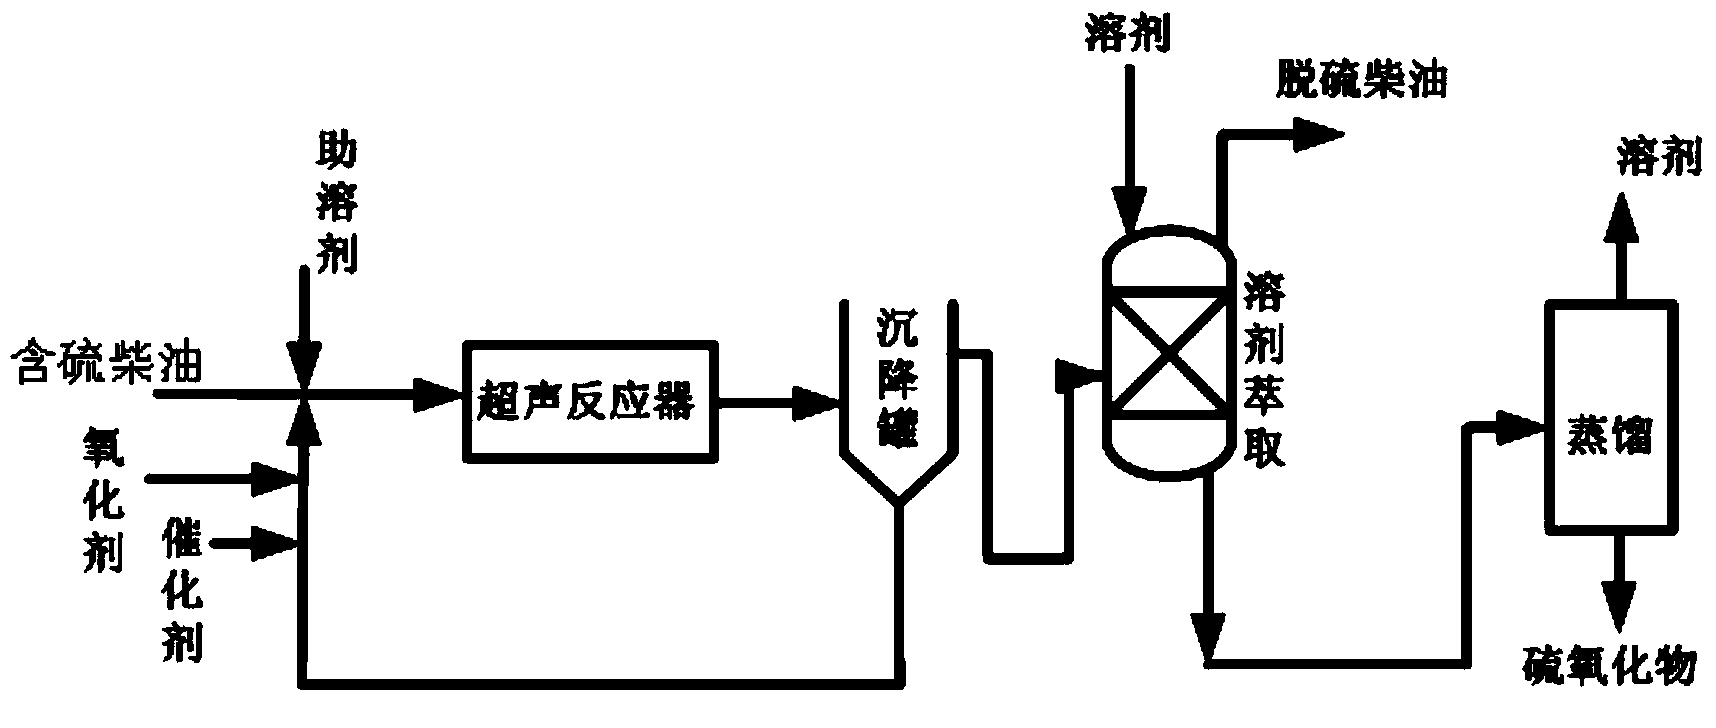 Ultrasonic oxidation-extraction and deep desulfurization method for diesel oil